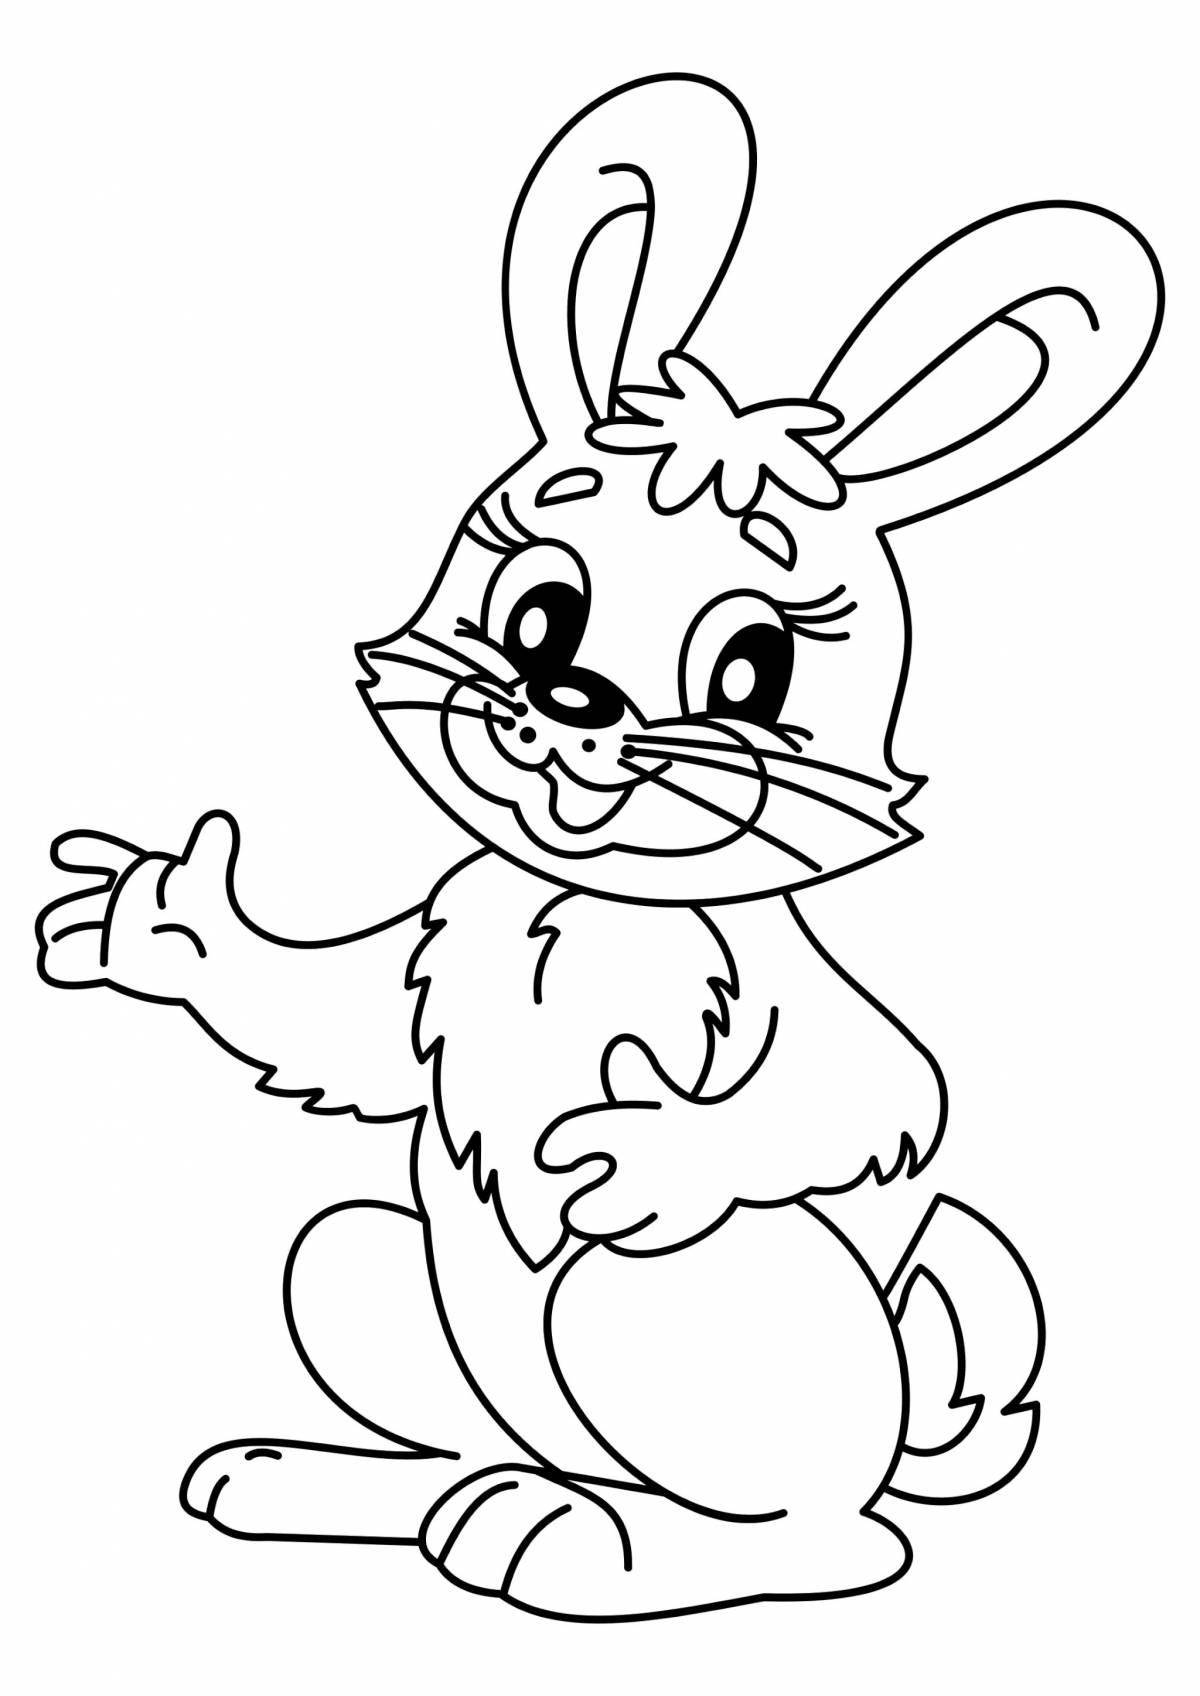 Exquisite bunny coloring book for kids